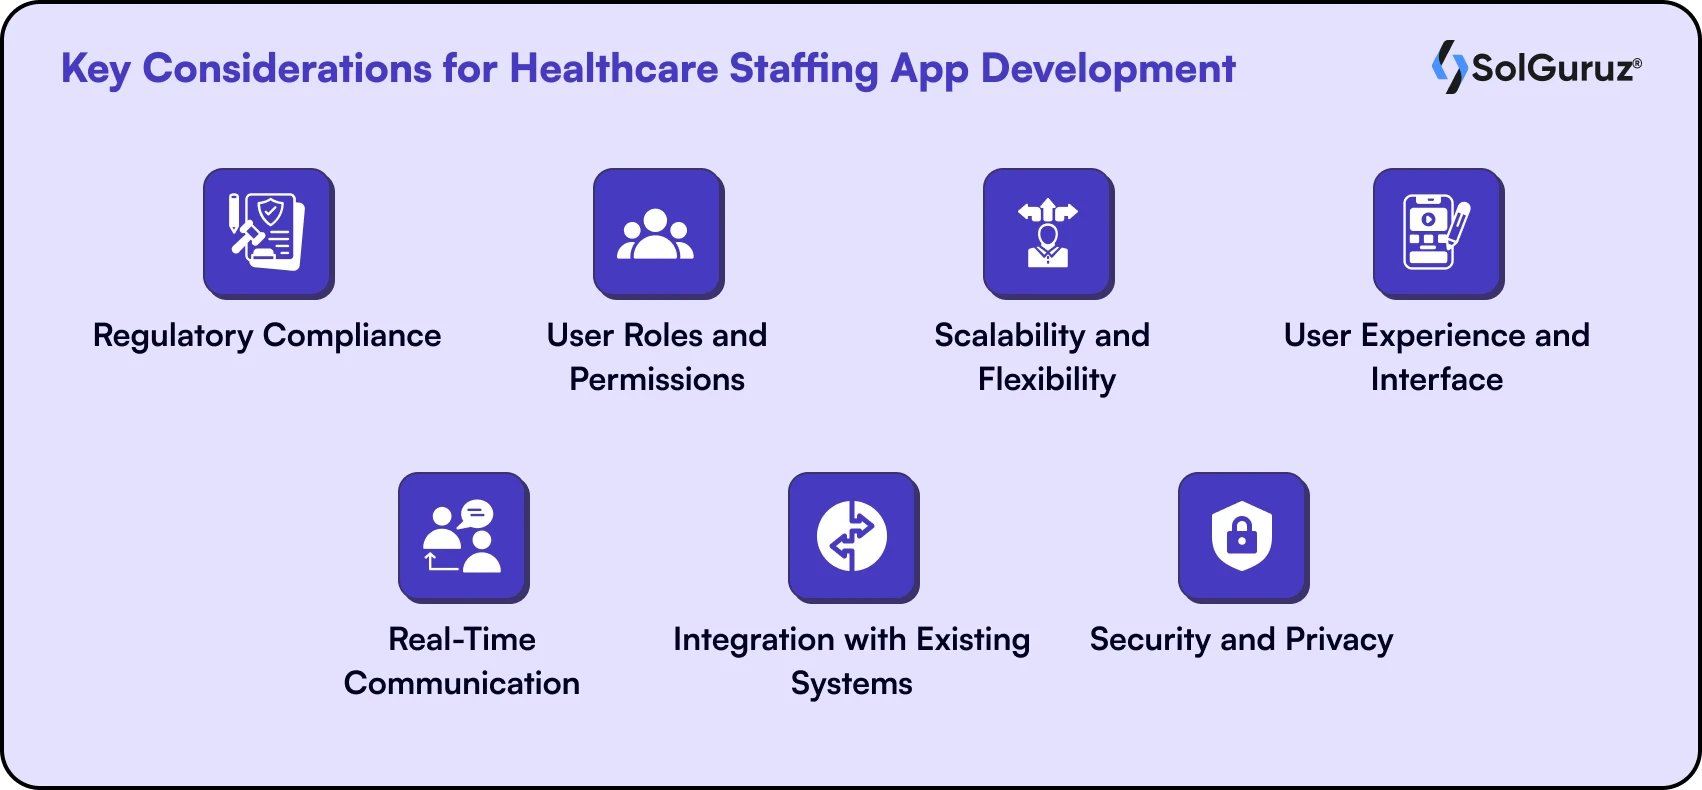 Key Considerations for Healthcare Staffing App Development